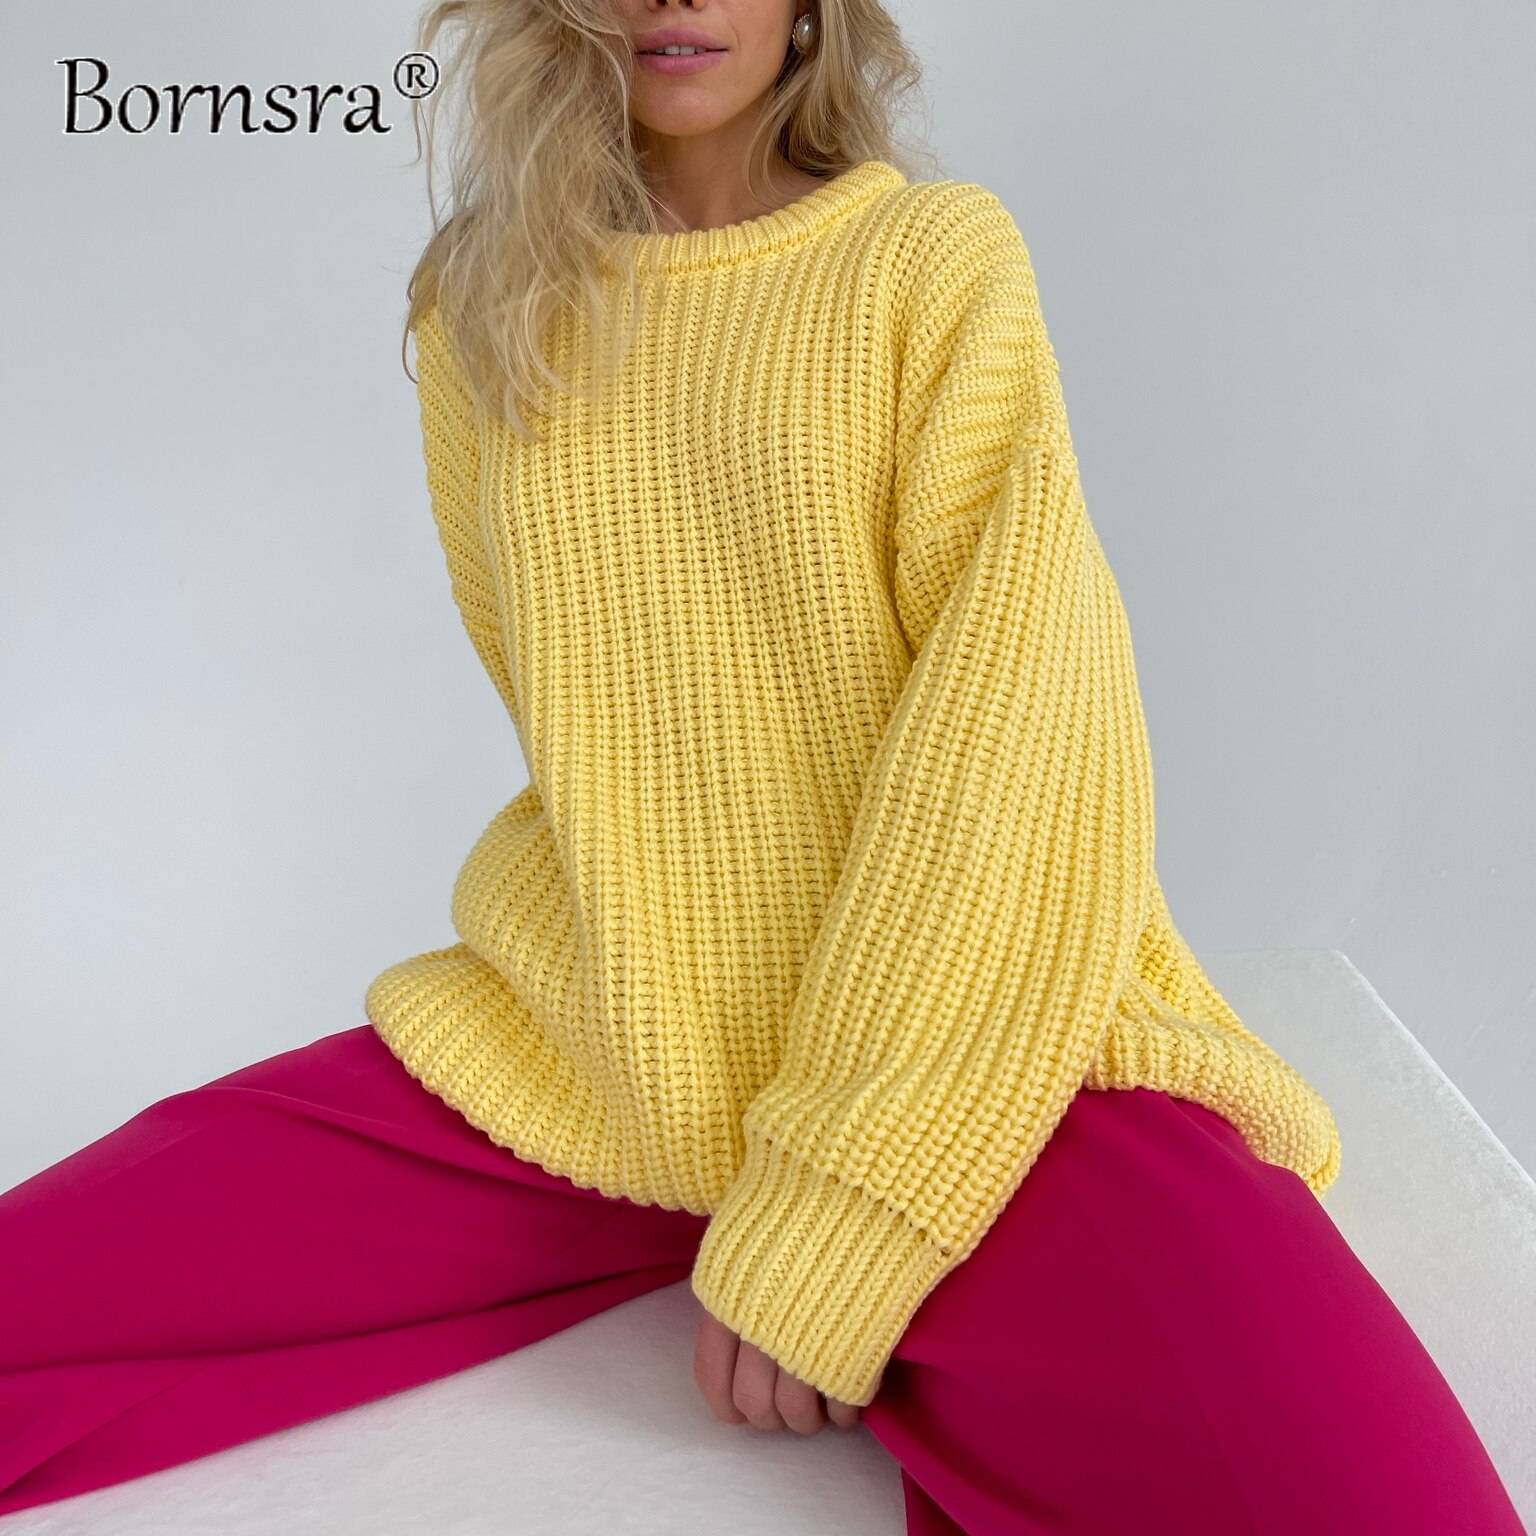 Women’s Oversized Knitted Sweater - Yellow / One Size - Sweaters - Shirts & Tops - 16 - 2024